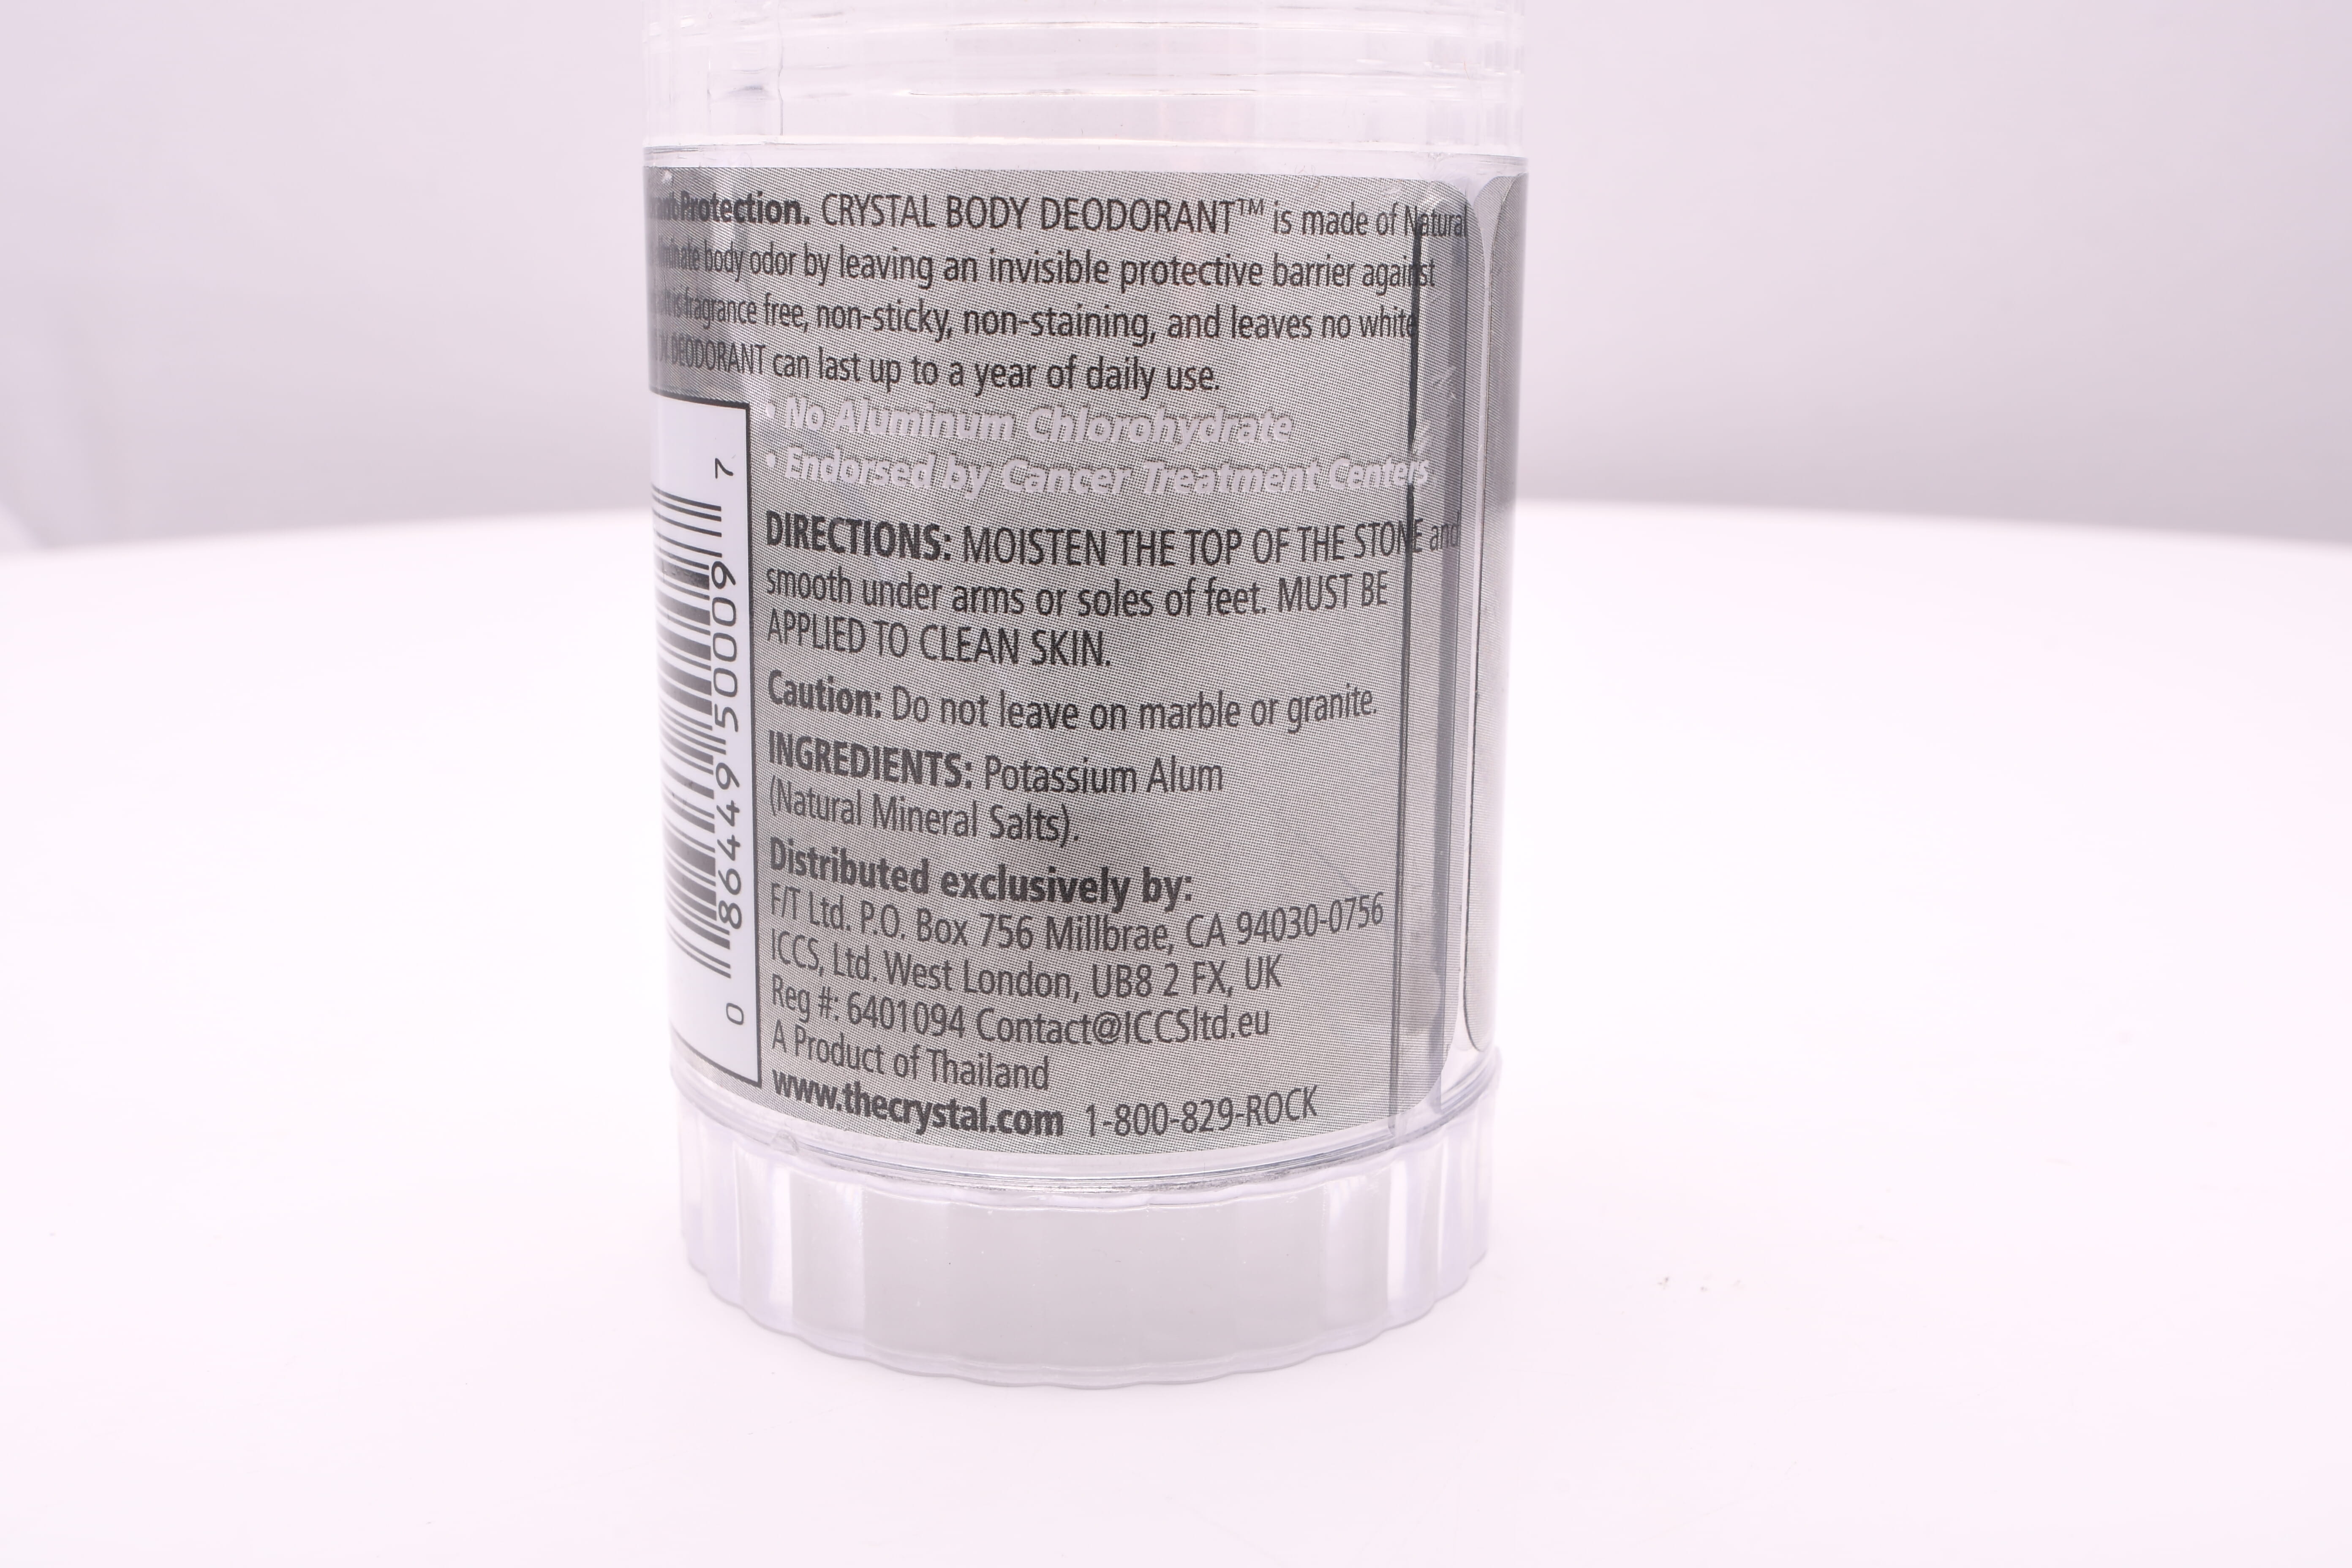 The backside of the crystal deodorant, noting that its principal ingredient is potassium alum.